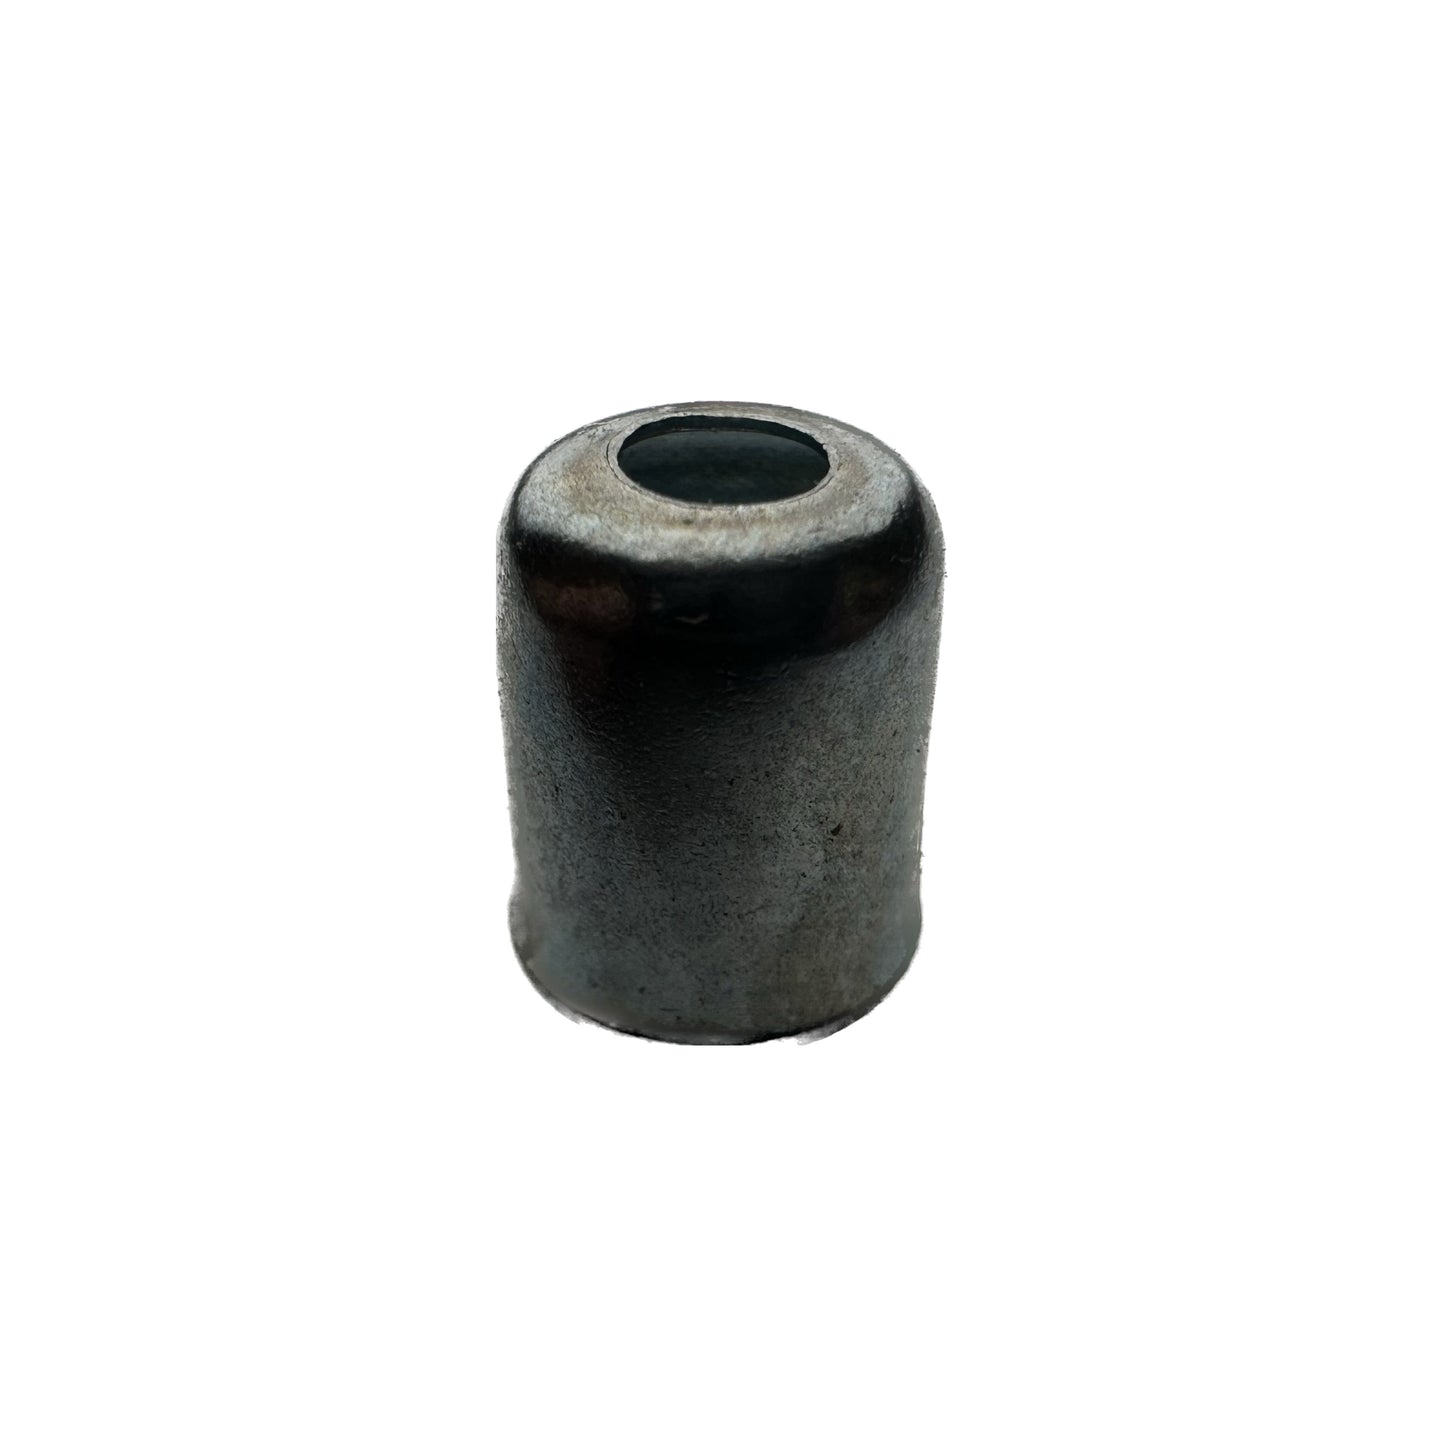 Sheath Cap for Brake Cable Housing